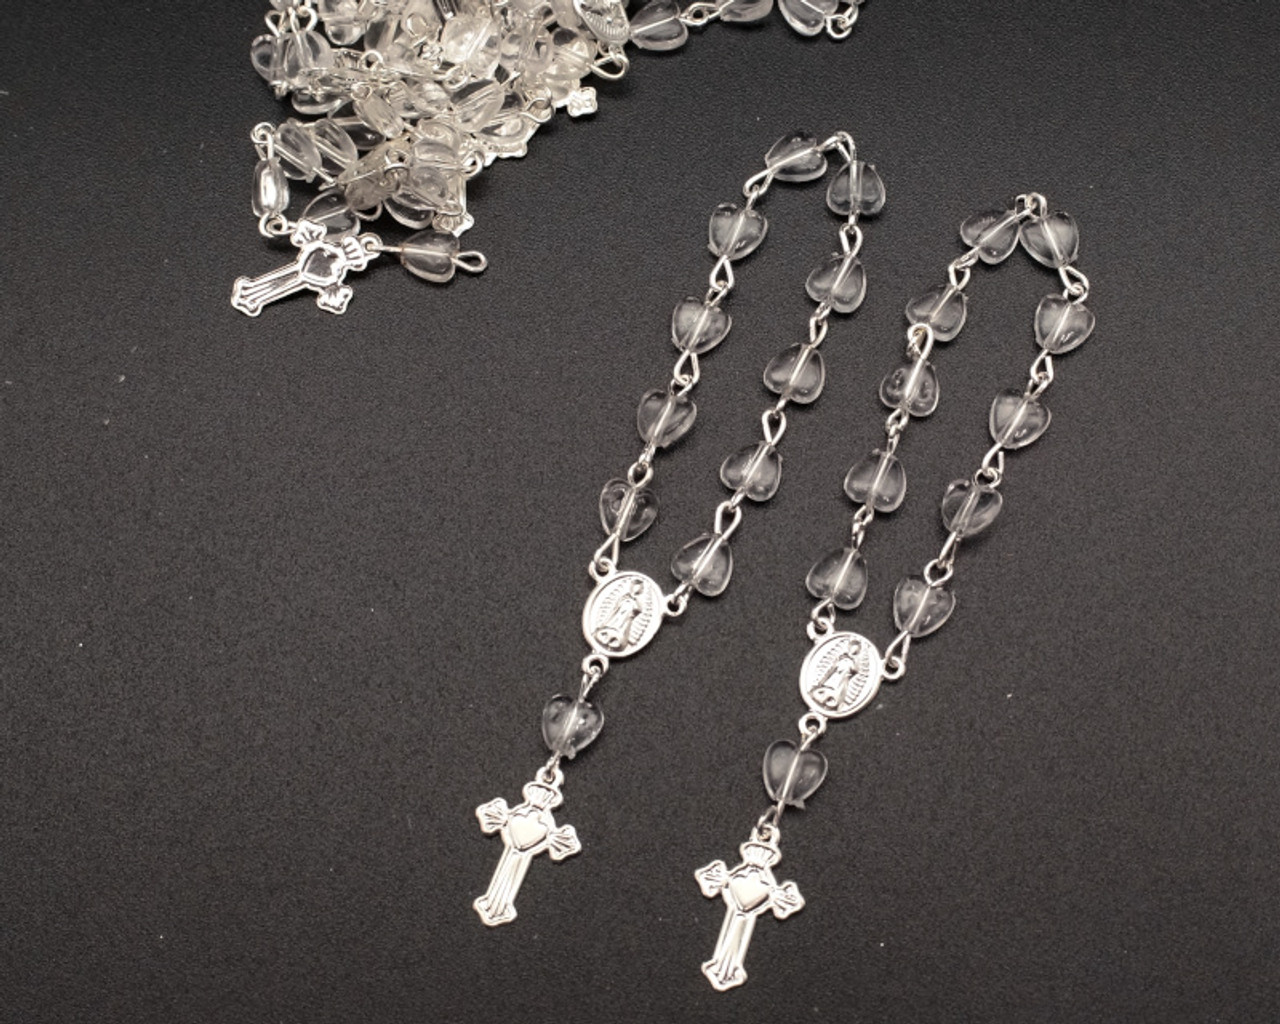 3.5 Clear Silver Miniature Rosaries - Pack of 100 Mini Rosary Favors